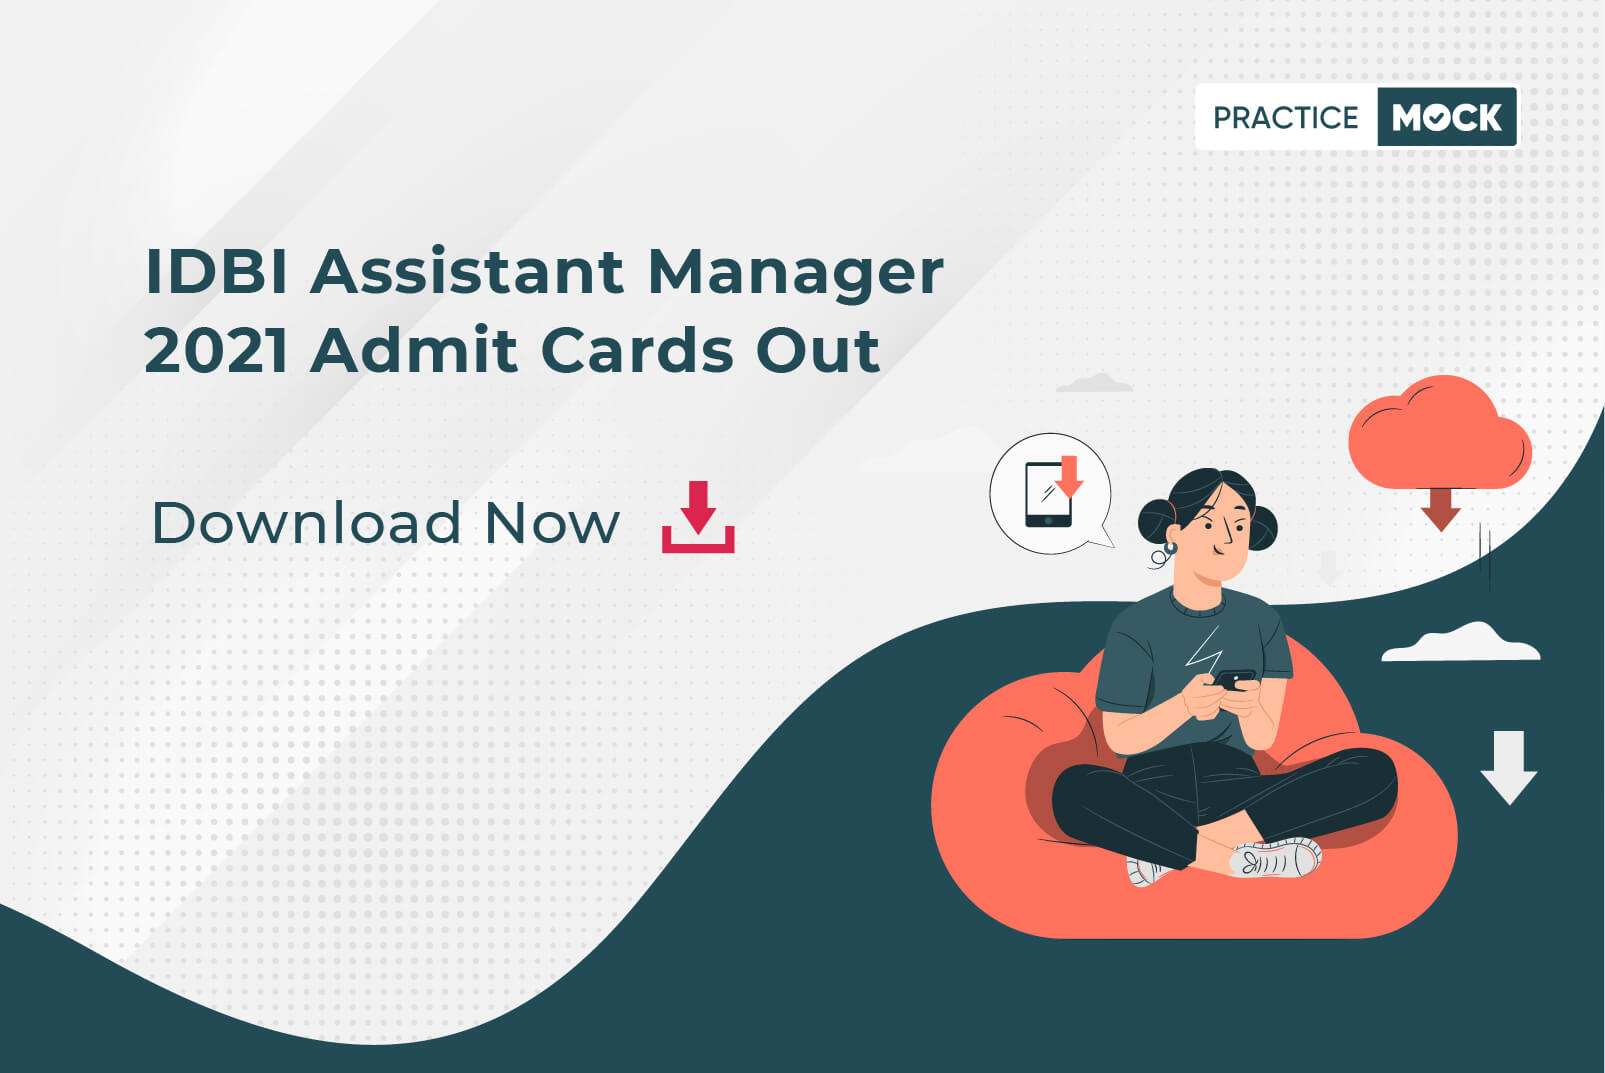 IDBI Assistant Manager Admit Cards